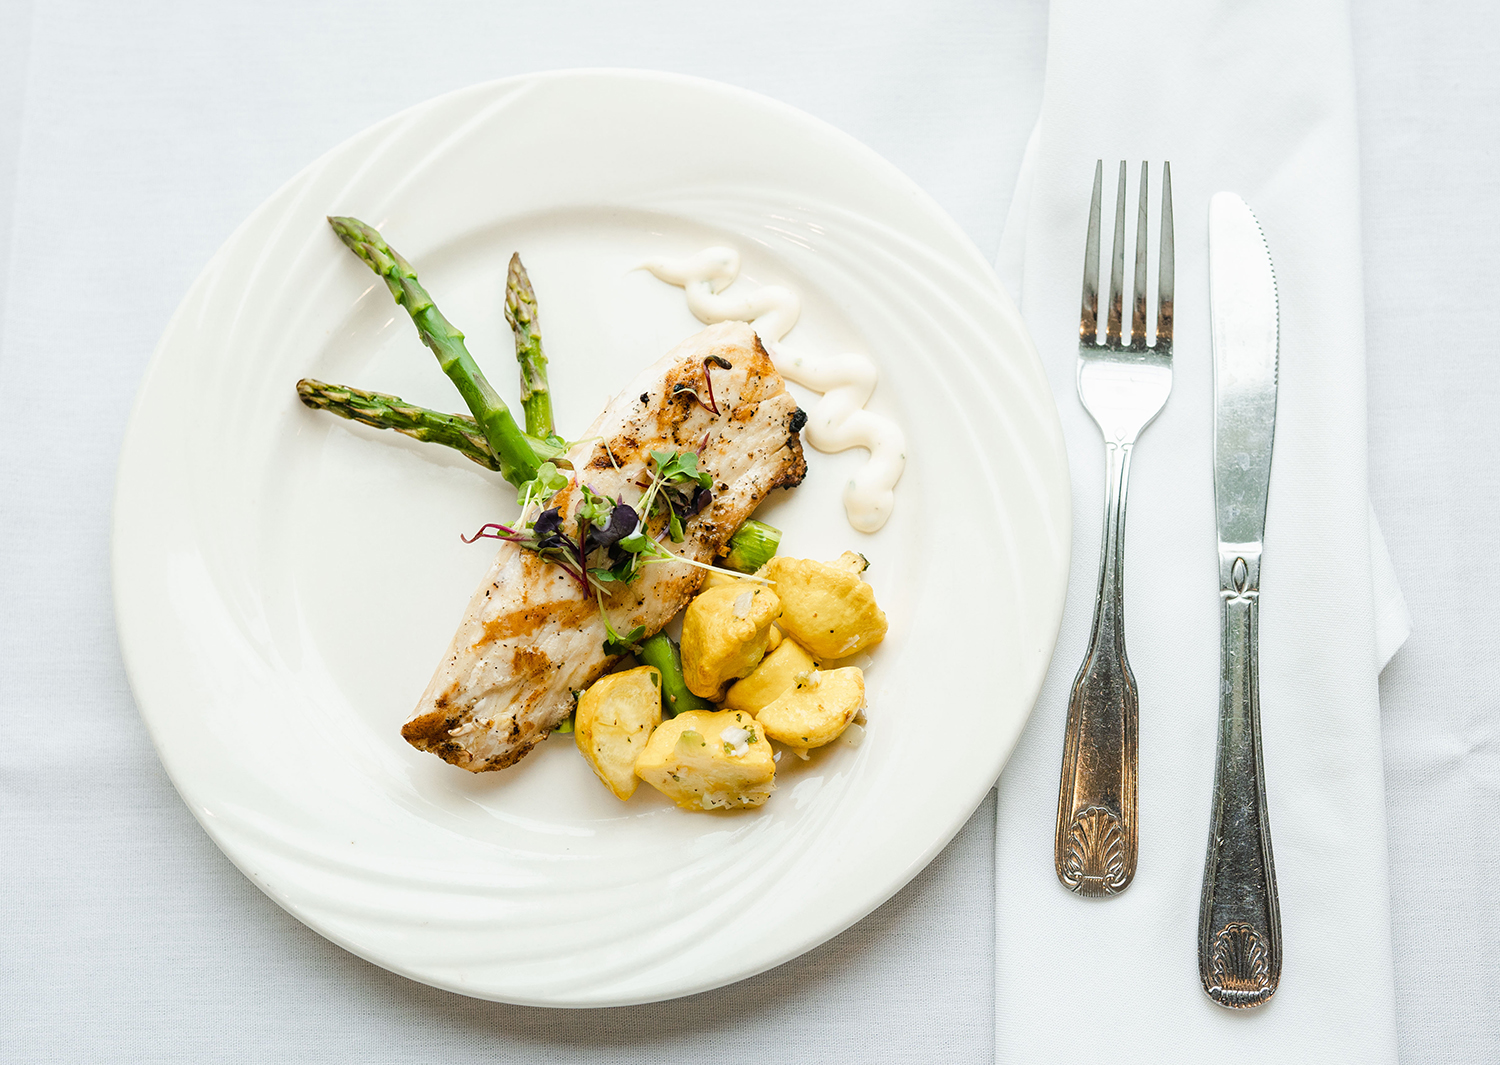 Elegantly plated chicken, asparagus and potatoes